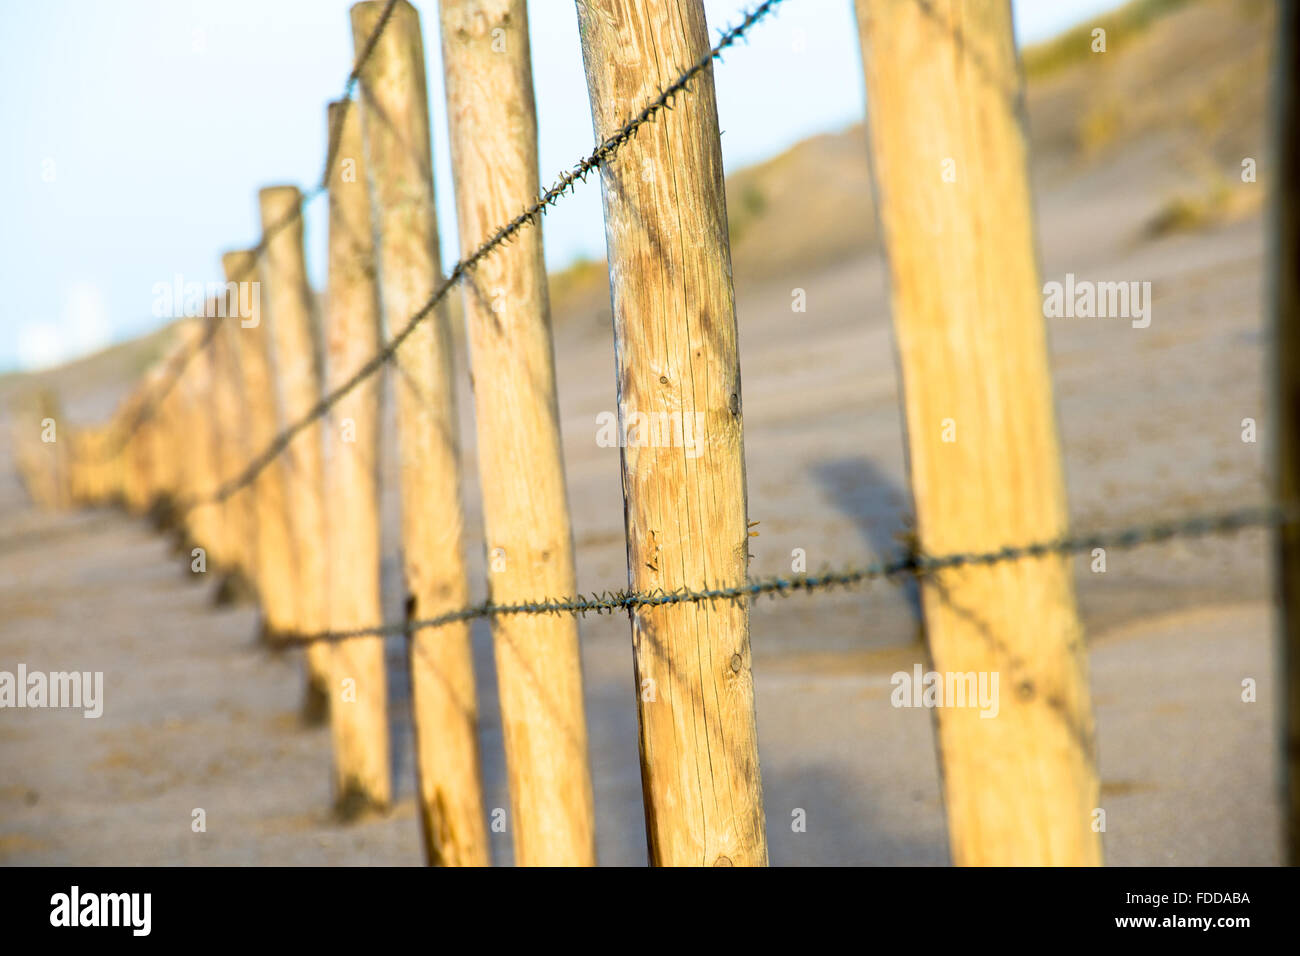 fence with row of wooden poles with barbed wire Stock Photo